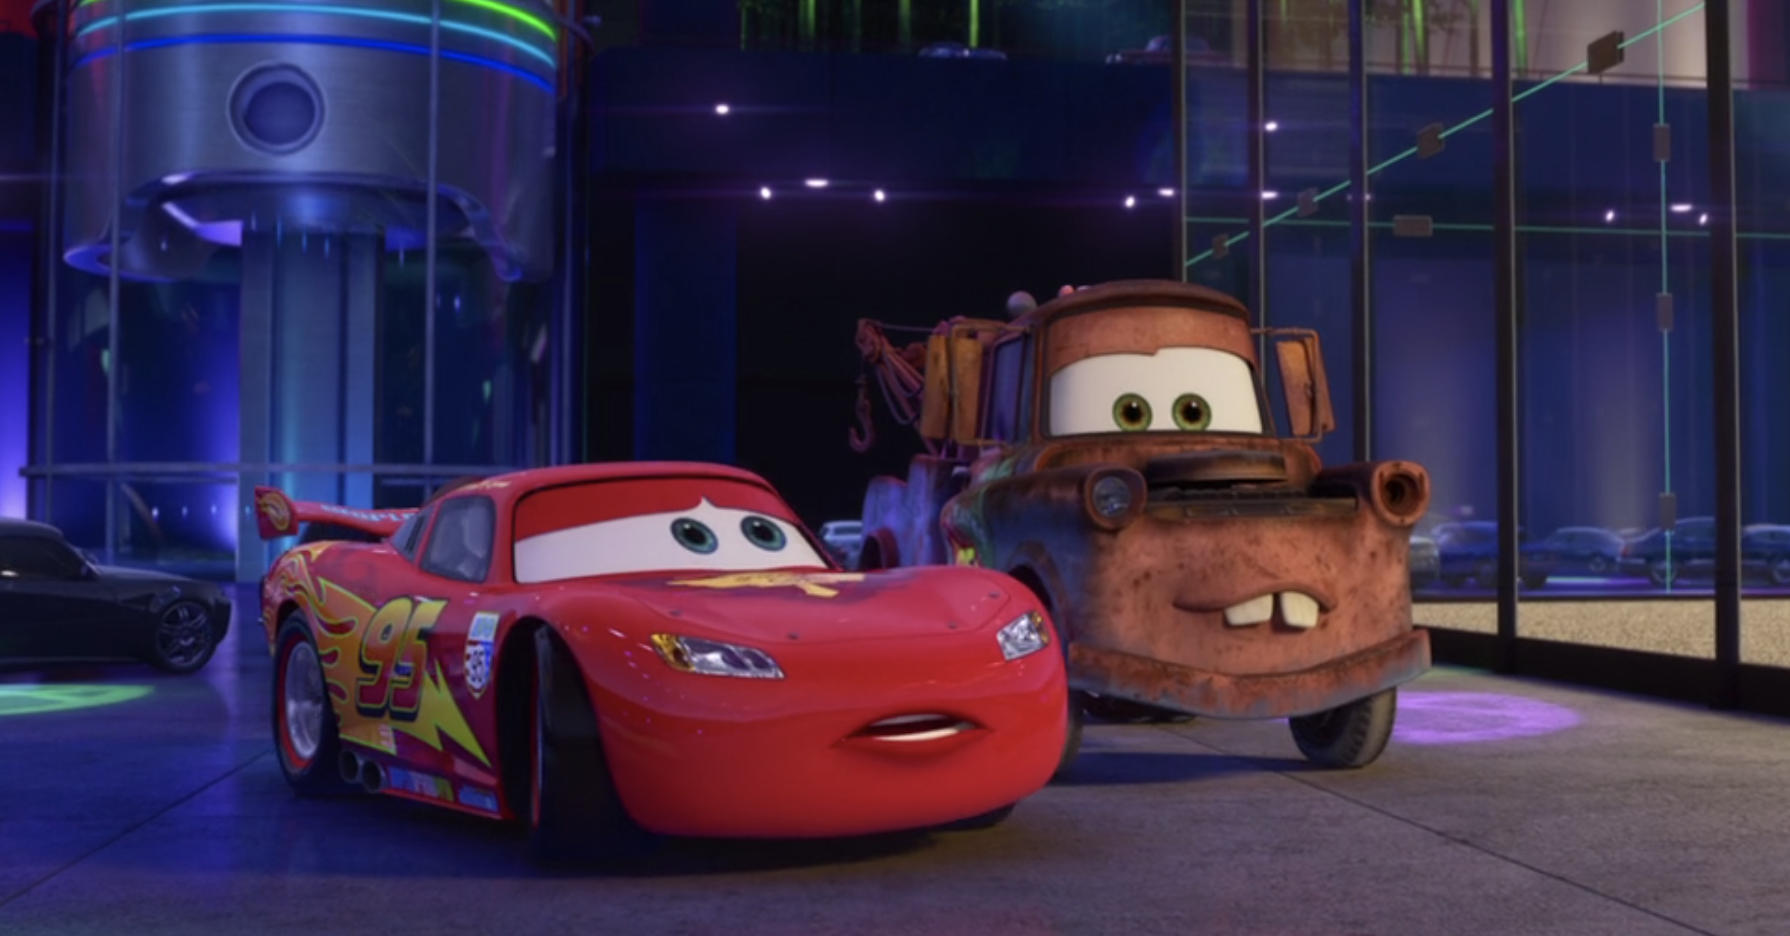 Lightning McQueen and Mater parked outside